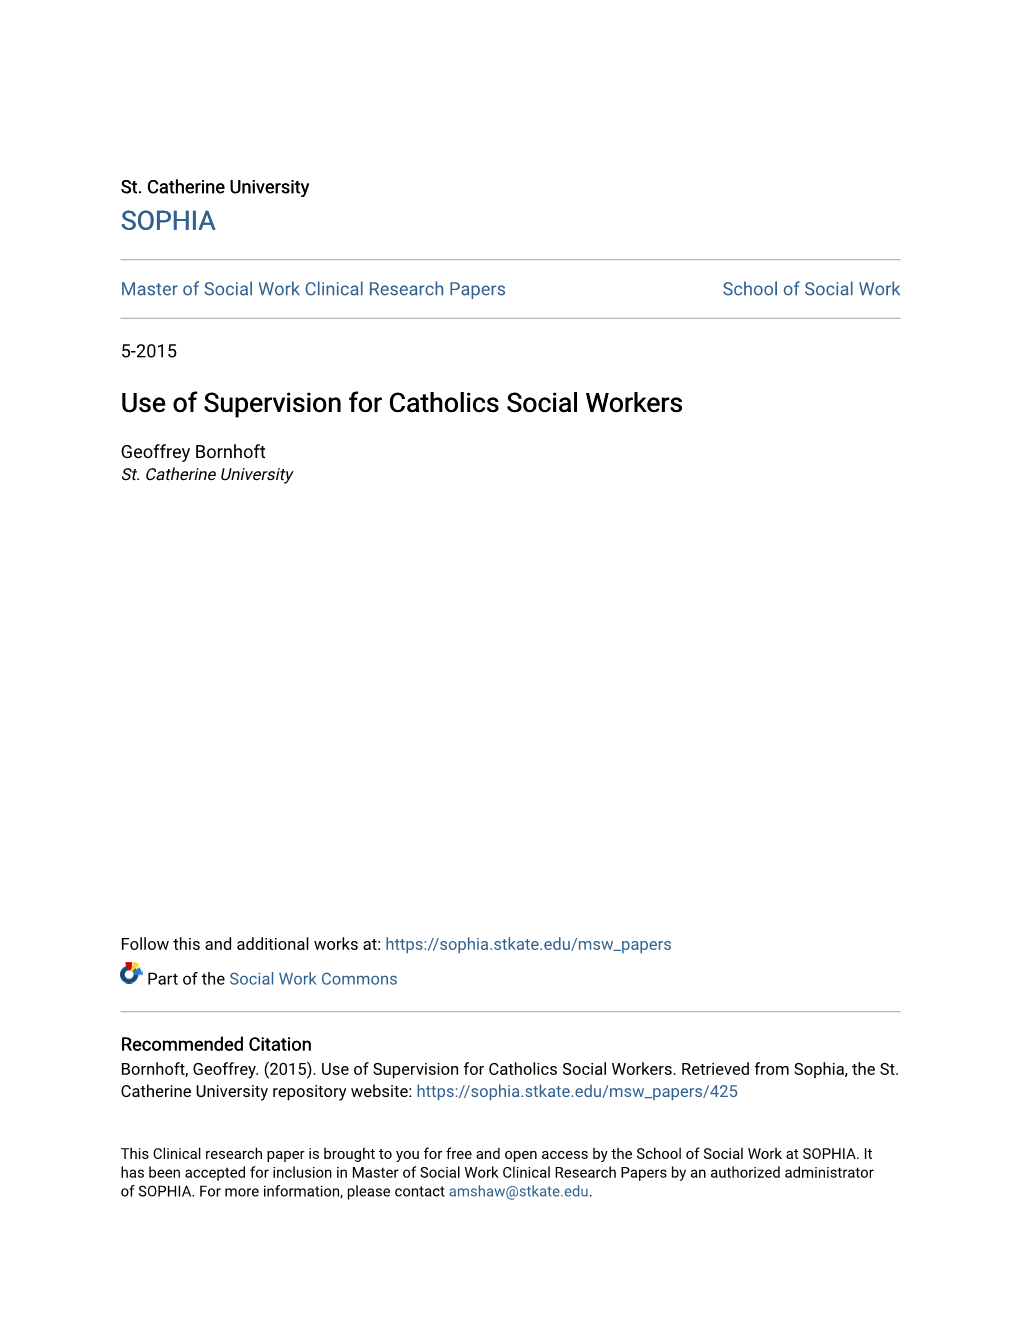 Use of Supervision for Catholics Social Workers